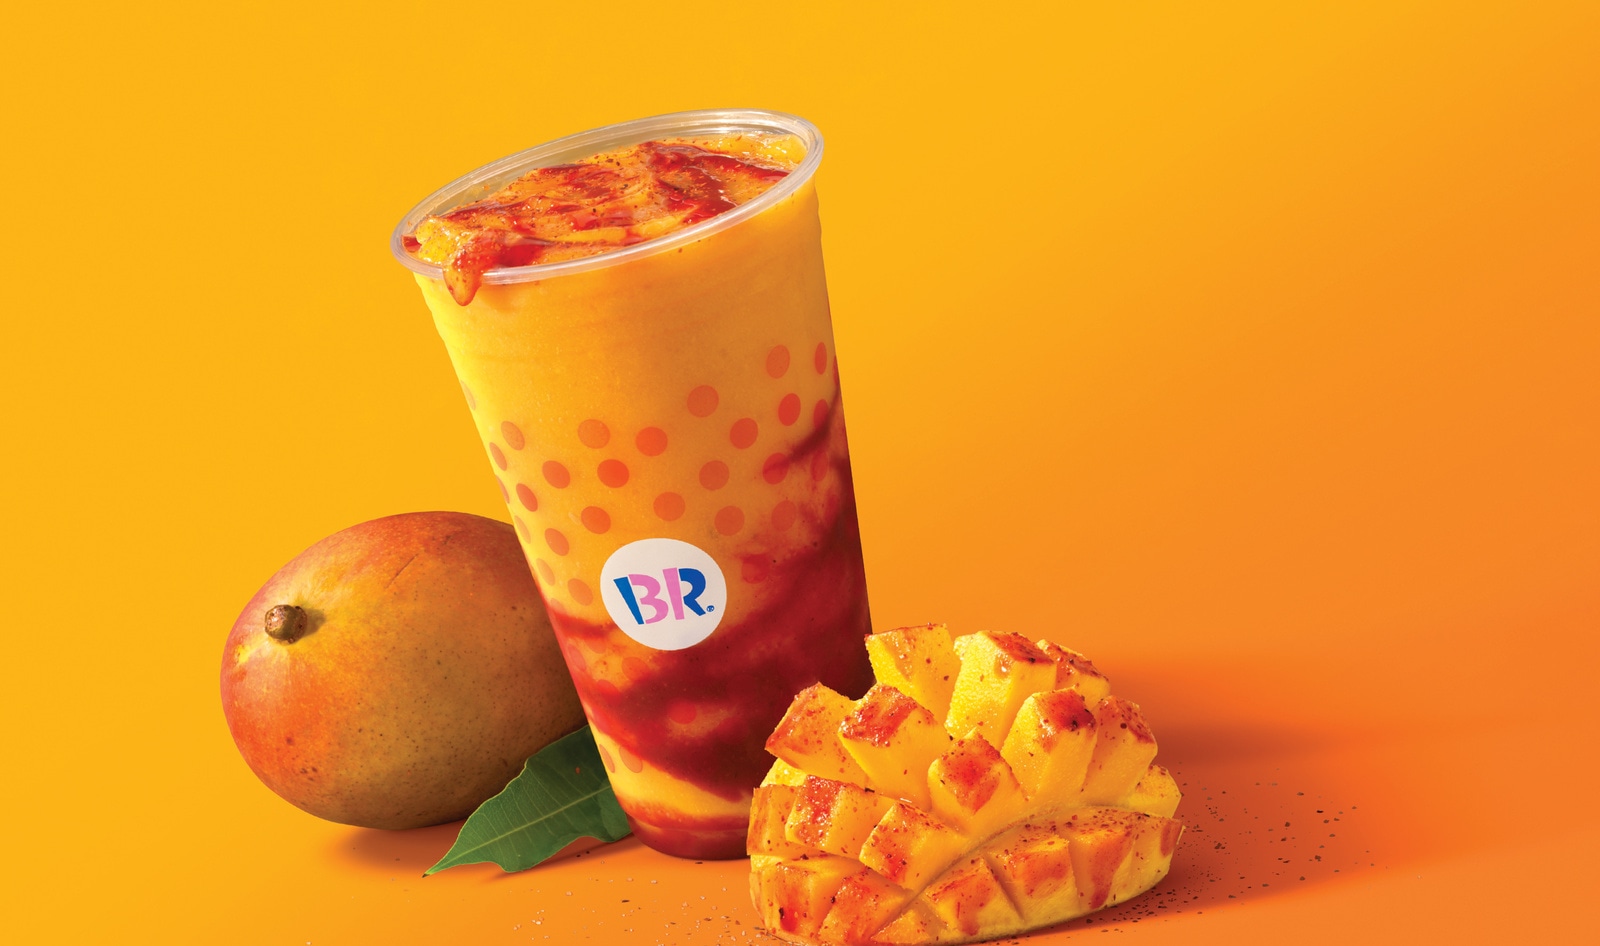 Baskin-Robbins Has a New Spicy Drink and It’s Totally Vegan